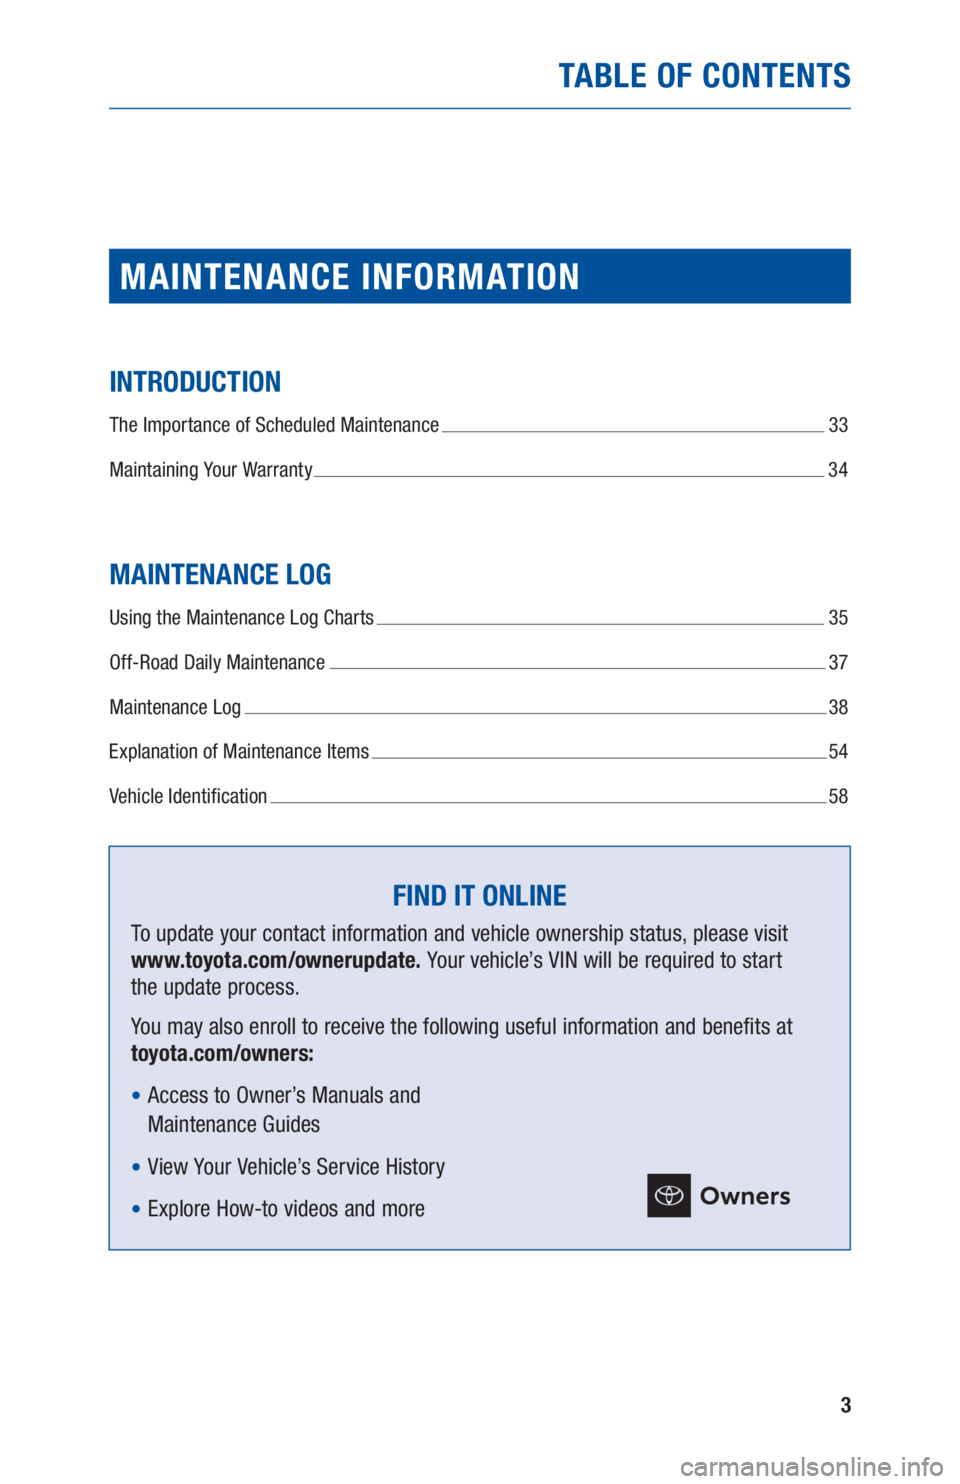 TOYOTA TUNDRA 2020  Warranties & Maintenance Guides (in English) 3
TABLE OF CONTENTS
MAINTENANCE INFORMATION
INTRODUCTION
The Importance of Scheduled Maintenance  33
Maintaining Your Warranty 
 34
MAINTENANCE LOG
Using the Maintenance Log Charts  35
Off-Road Daily 